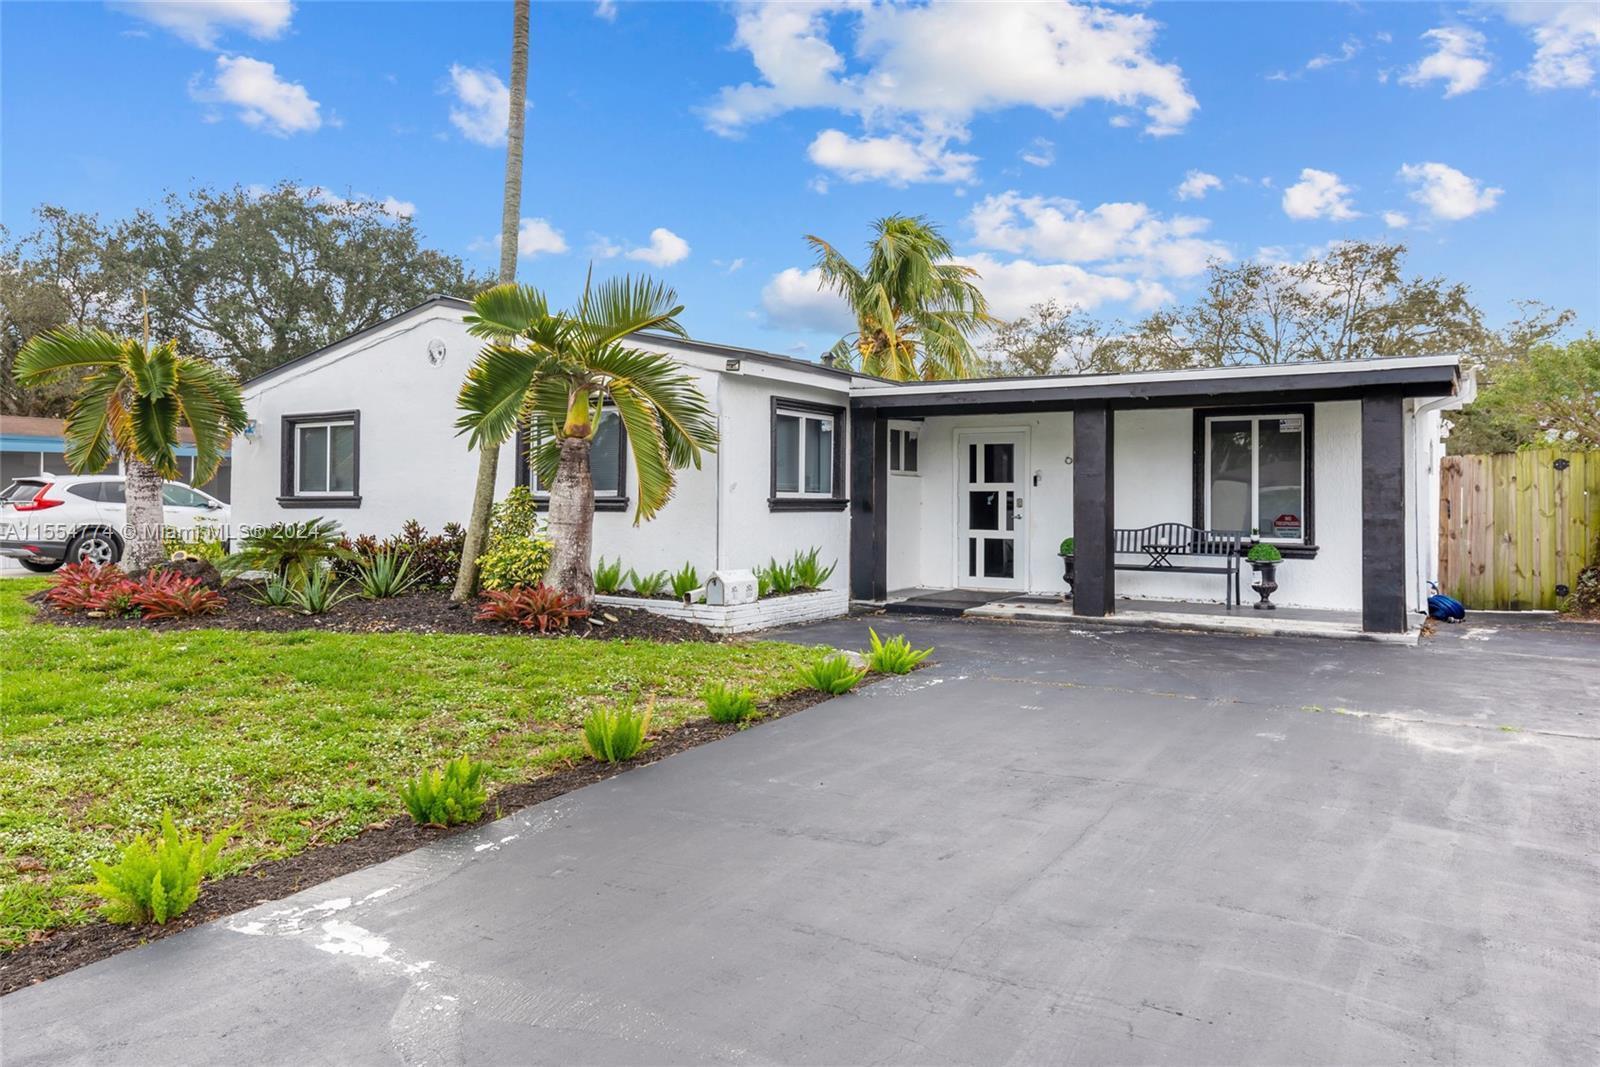 Photo of 6610 Cody St in Hollywood, FL